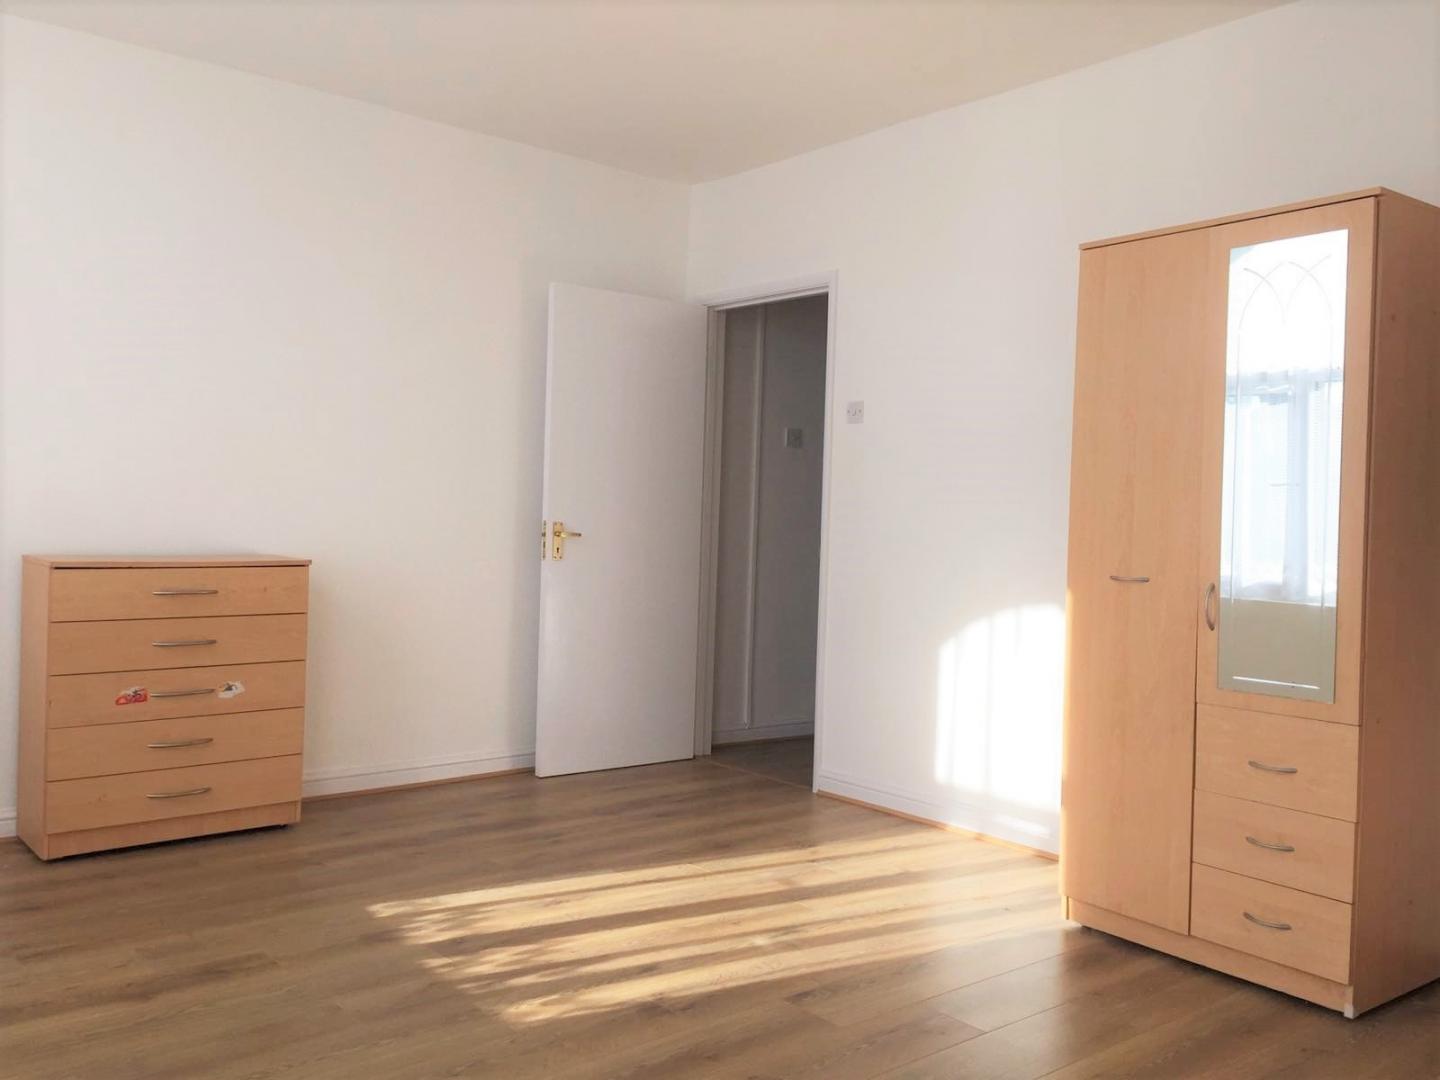 			GREAT SPACIOUS SPLIT LEVEL TWO BEDROOM APARTMENT, 2 Bedroom, 1 bath, 1 reception Flat			 Commercial Road, ALDGATE-WHITECHAPEL-SHADWELL